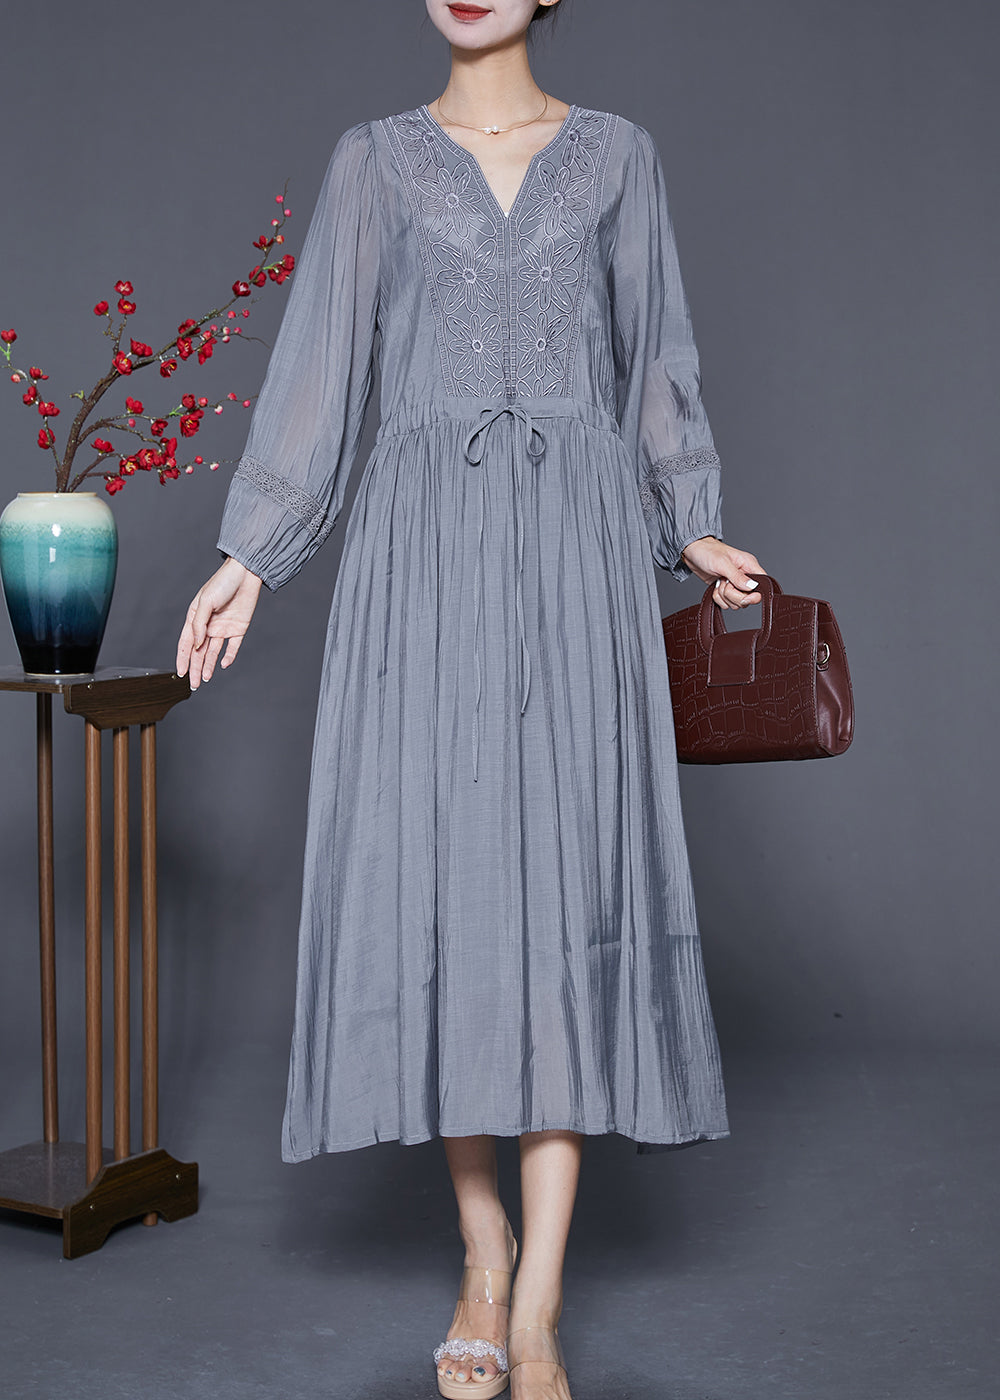 Natural Grey Embroideried Cinched Patchwork Cotton Dresses Summer Ada Fashion